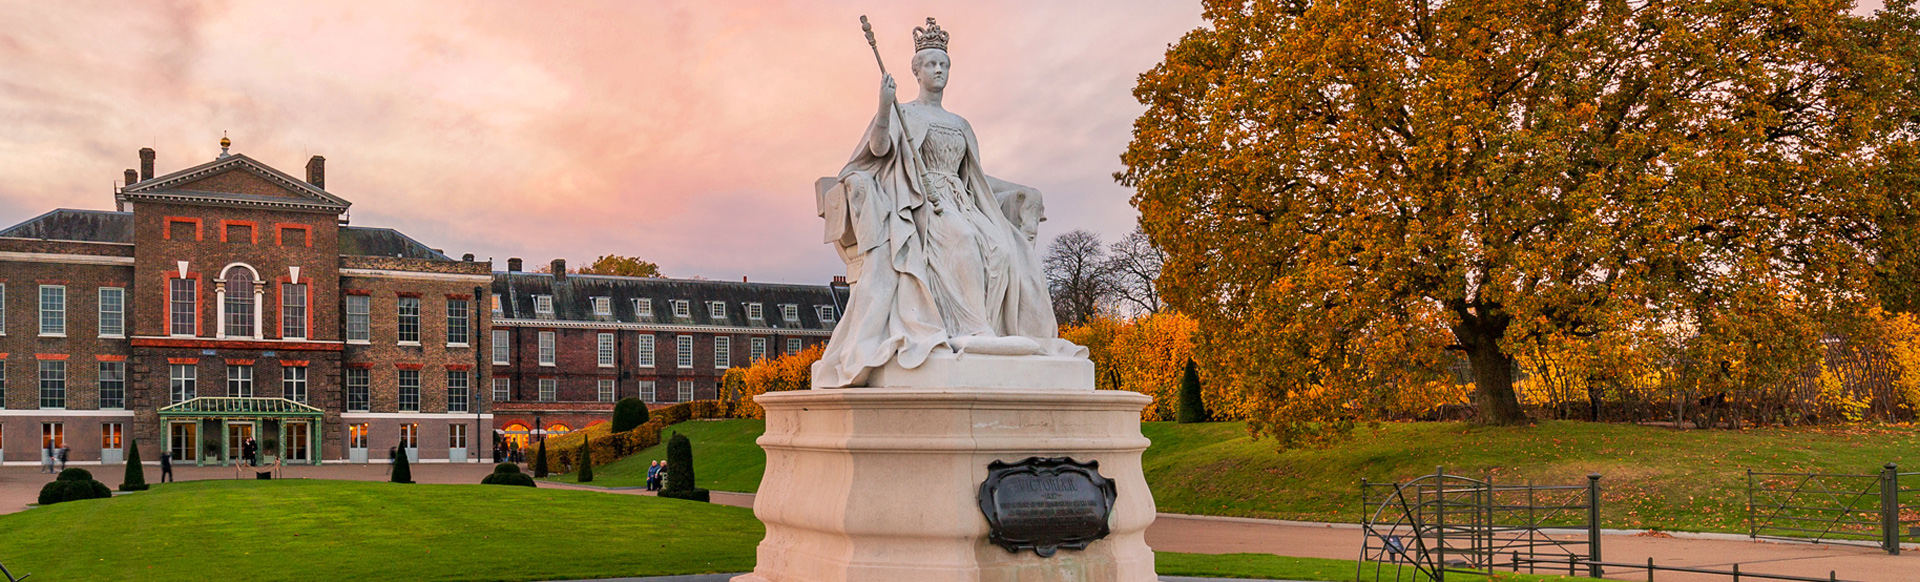 Kensington Palace and the statue of Queen Victoria at sunset.